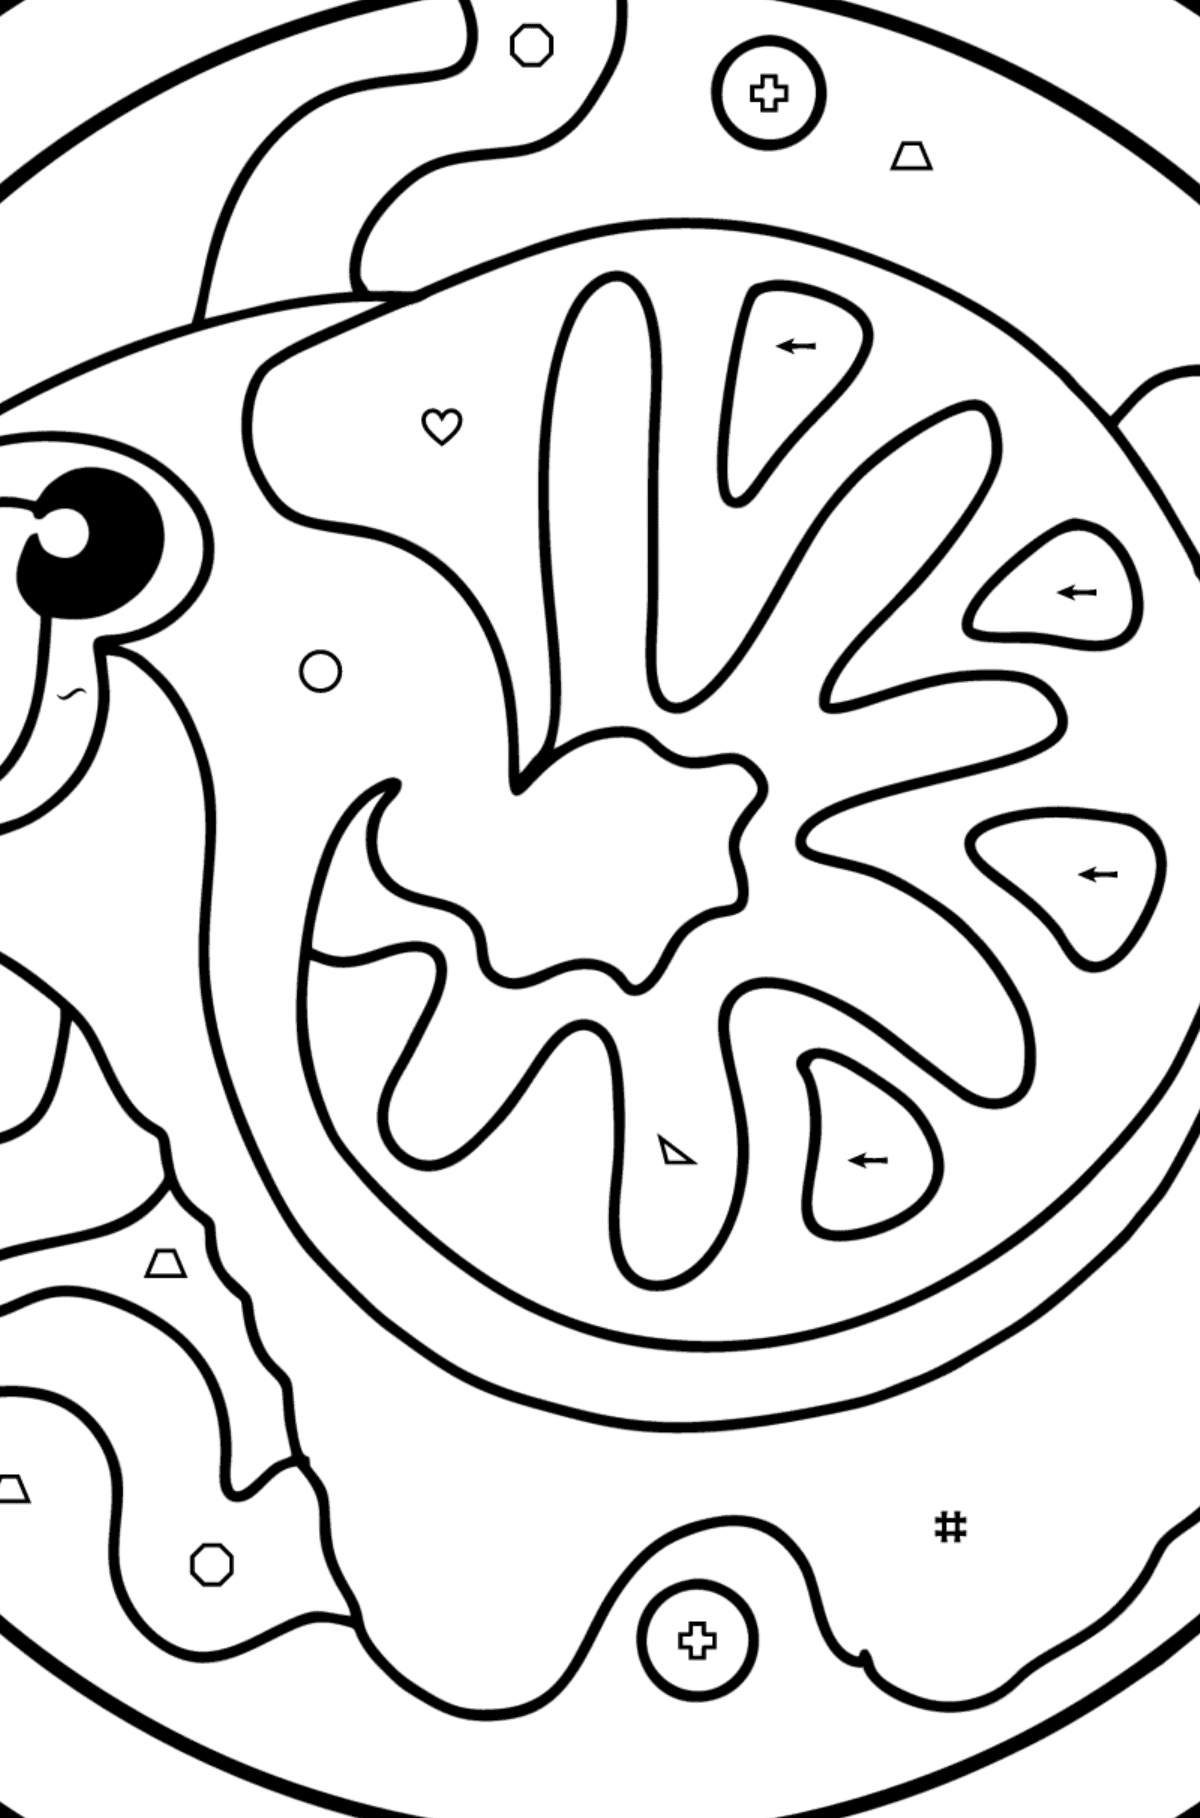 Coloring page for kids - zodiac sign Aries - Coloring by Symbols and Geometric Shapes for Kids